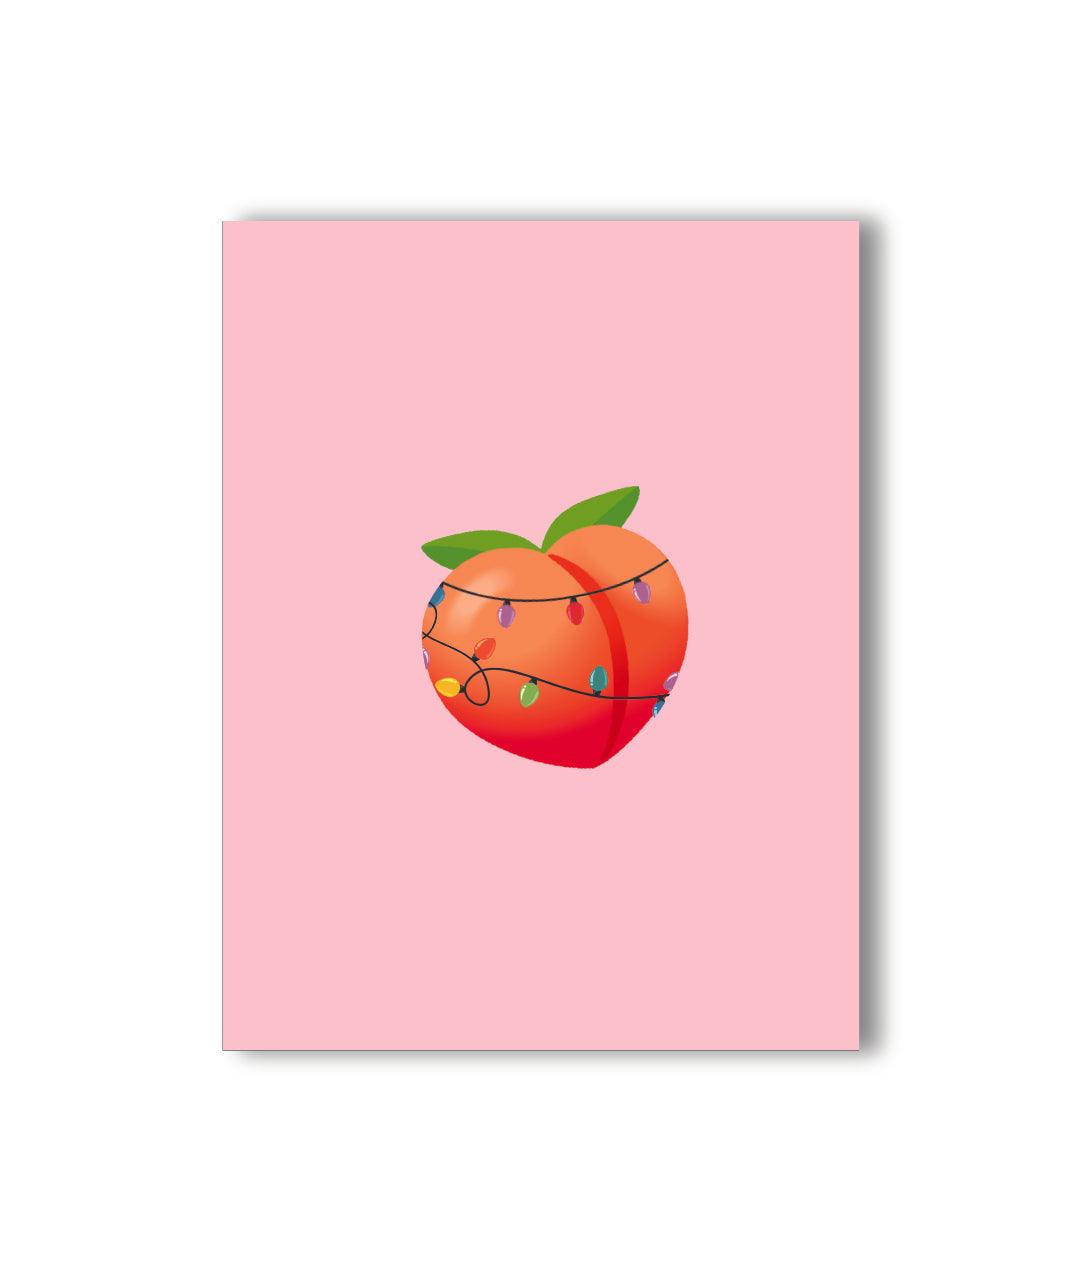 Cheeky and festive Christmas card with a pink background, featuring a peach emoji wrapped in holiday lights, perfect for spreading playful and fun holiday vibes.